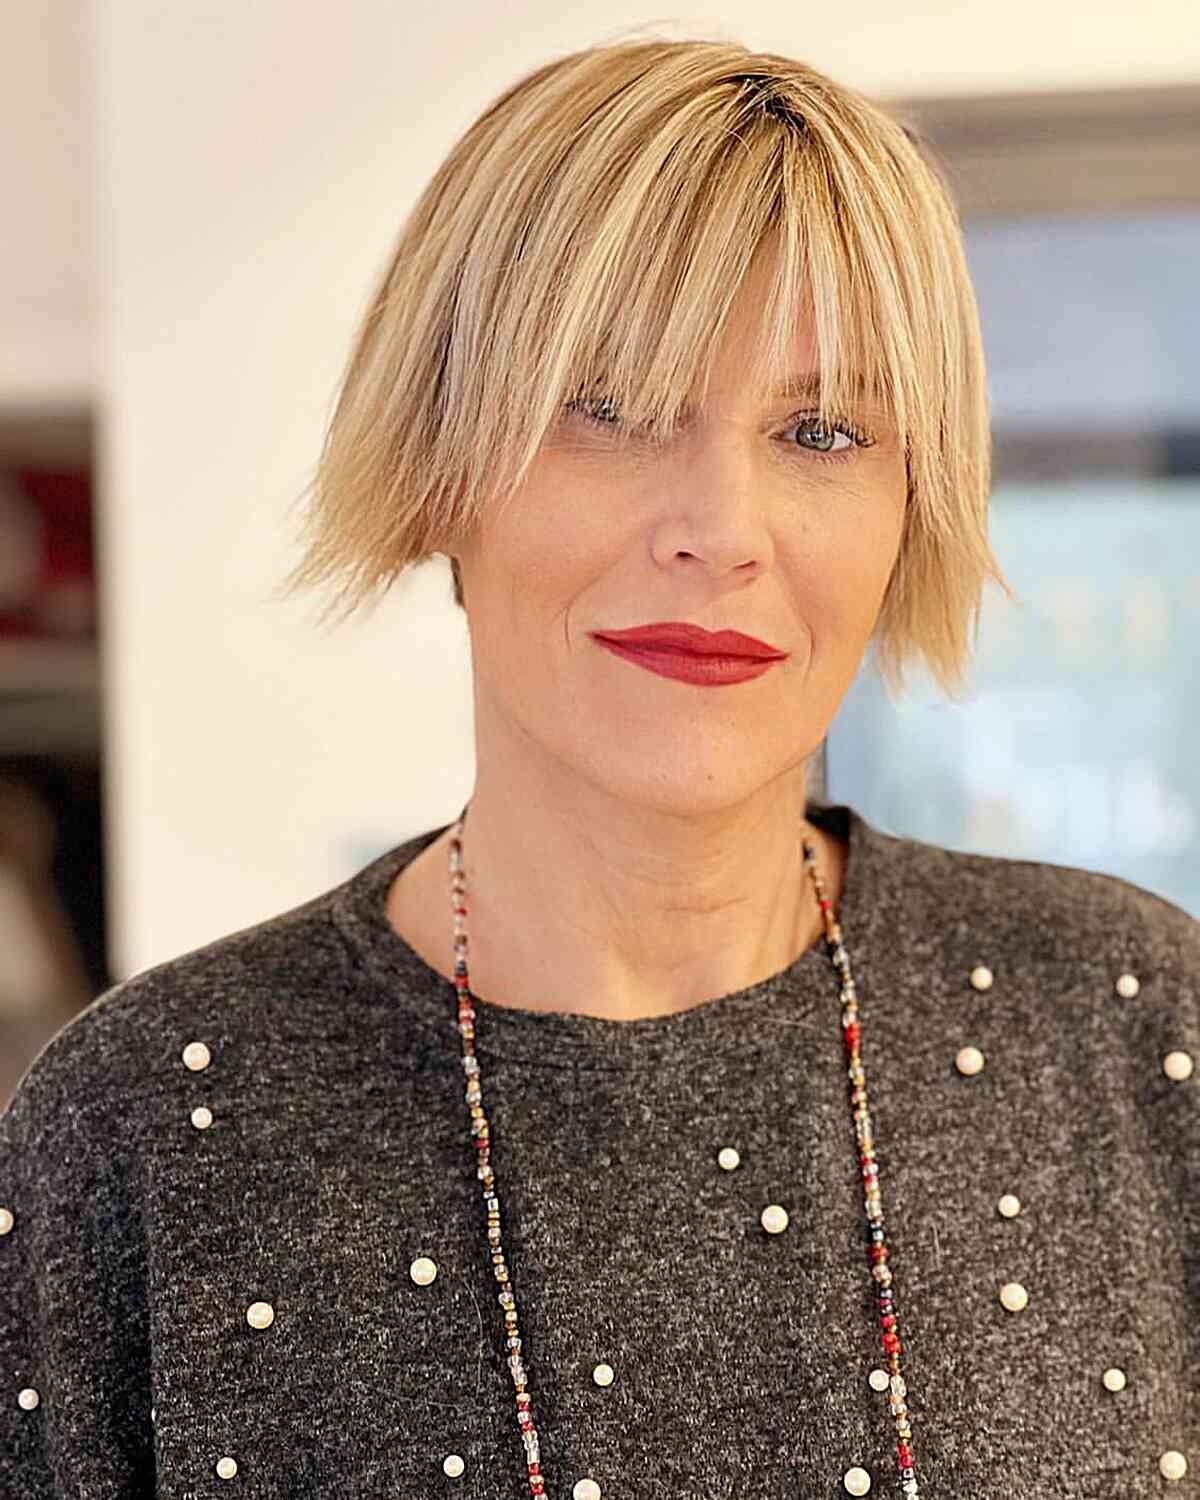 Ear-Length Very Choppy Bob for Straight Hair with choppy, piecey ends and eye-grazing bangs